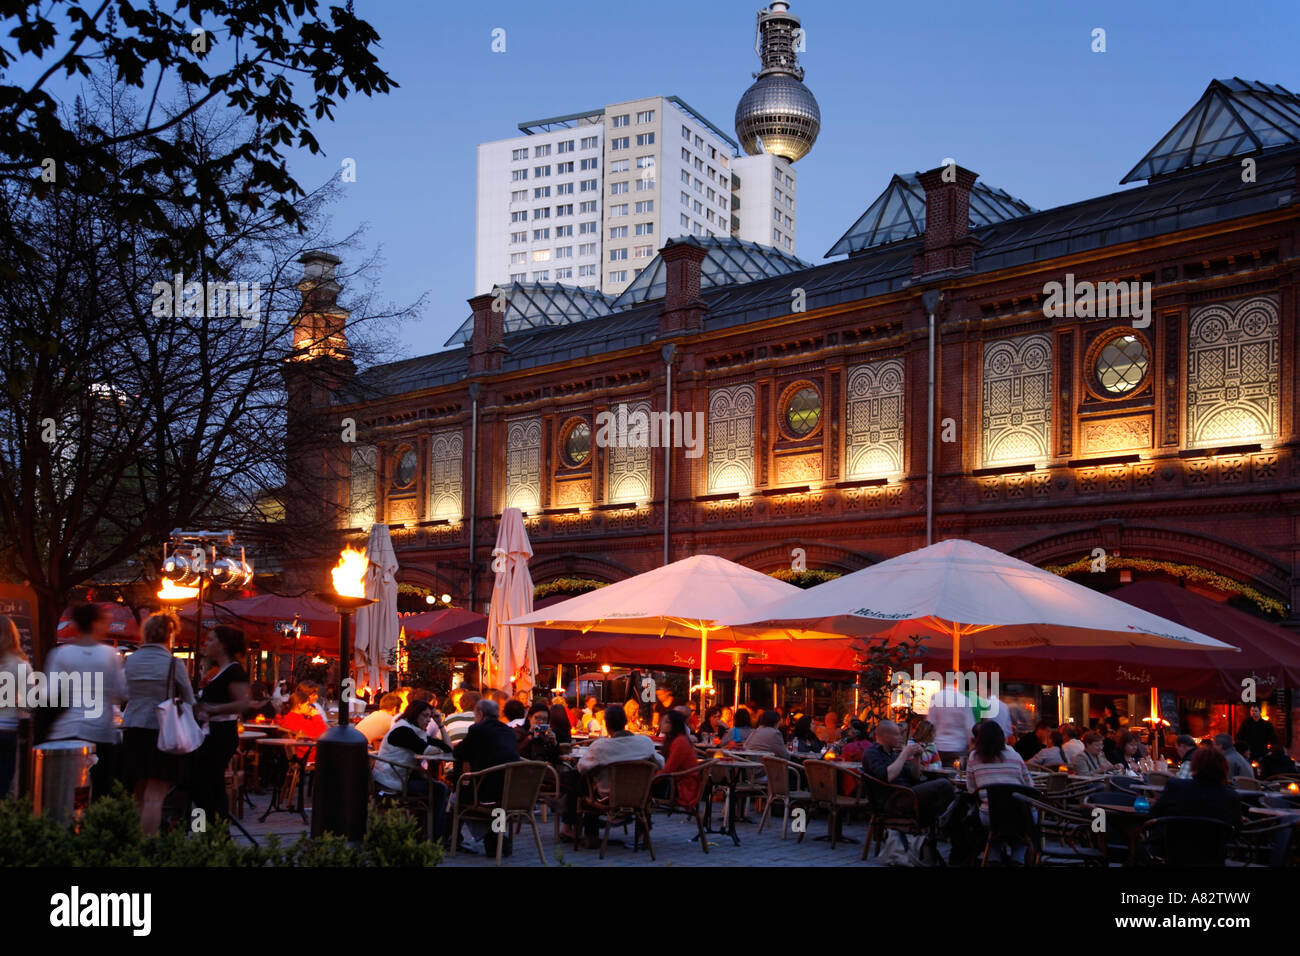 Berlin hackesch market in summer tourist magnet with cafes restaurants S Bahn station people Stock Photo